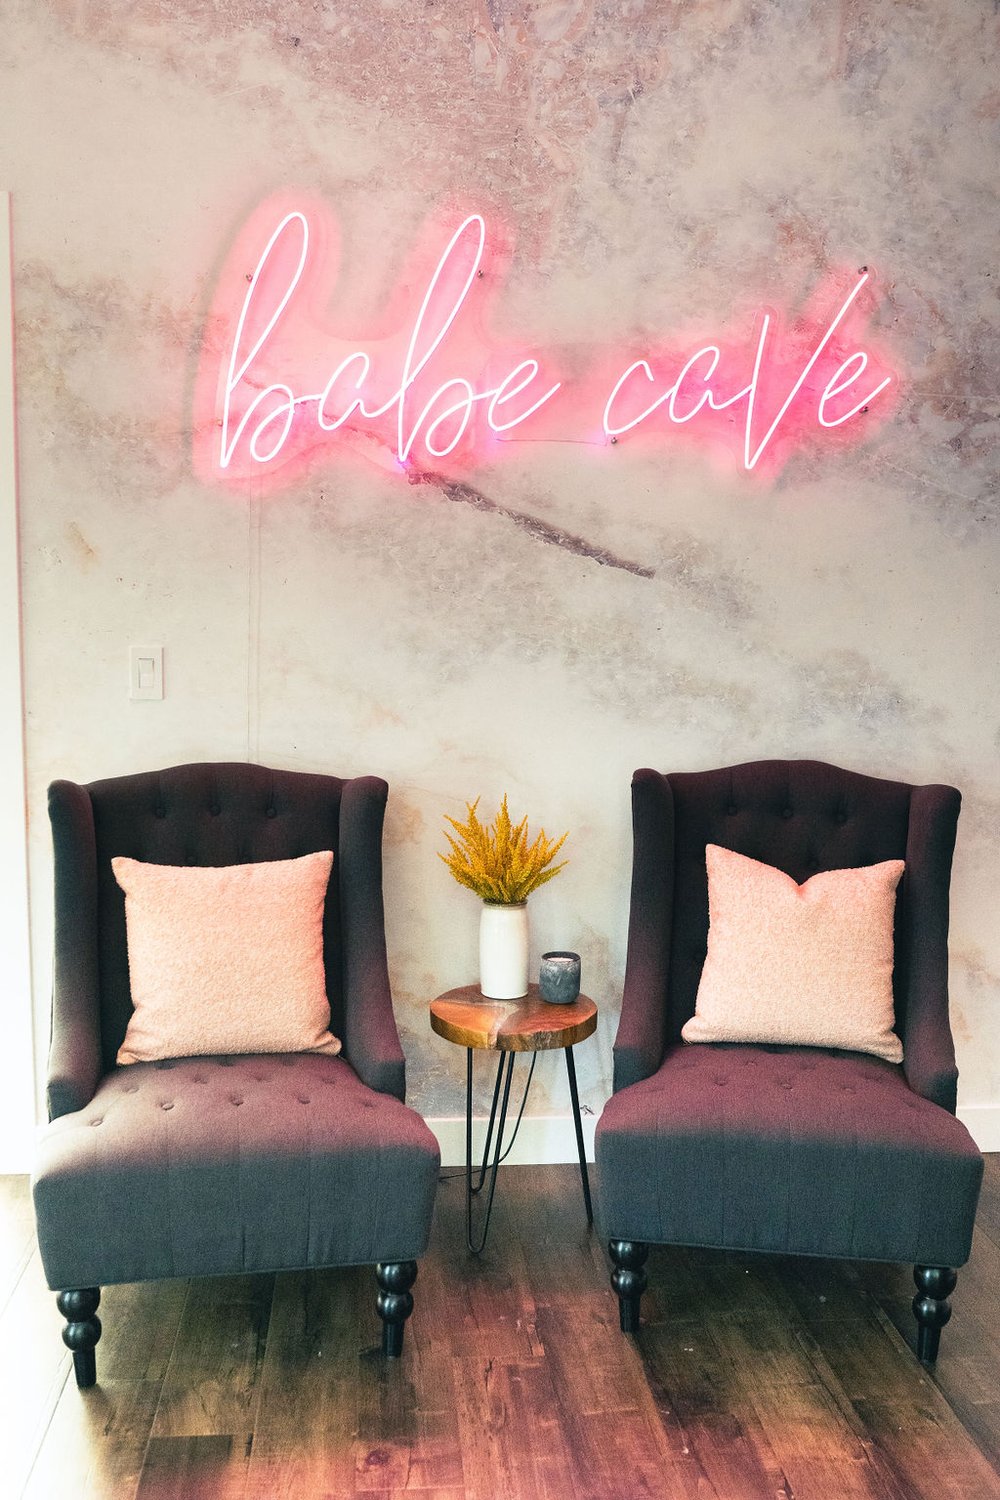 pink LED sign that says 'babe cave' hangs on the wall above two identical gray arm chairs with a small wooden stool table between them